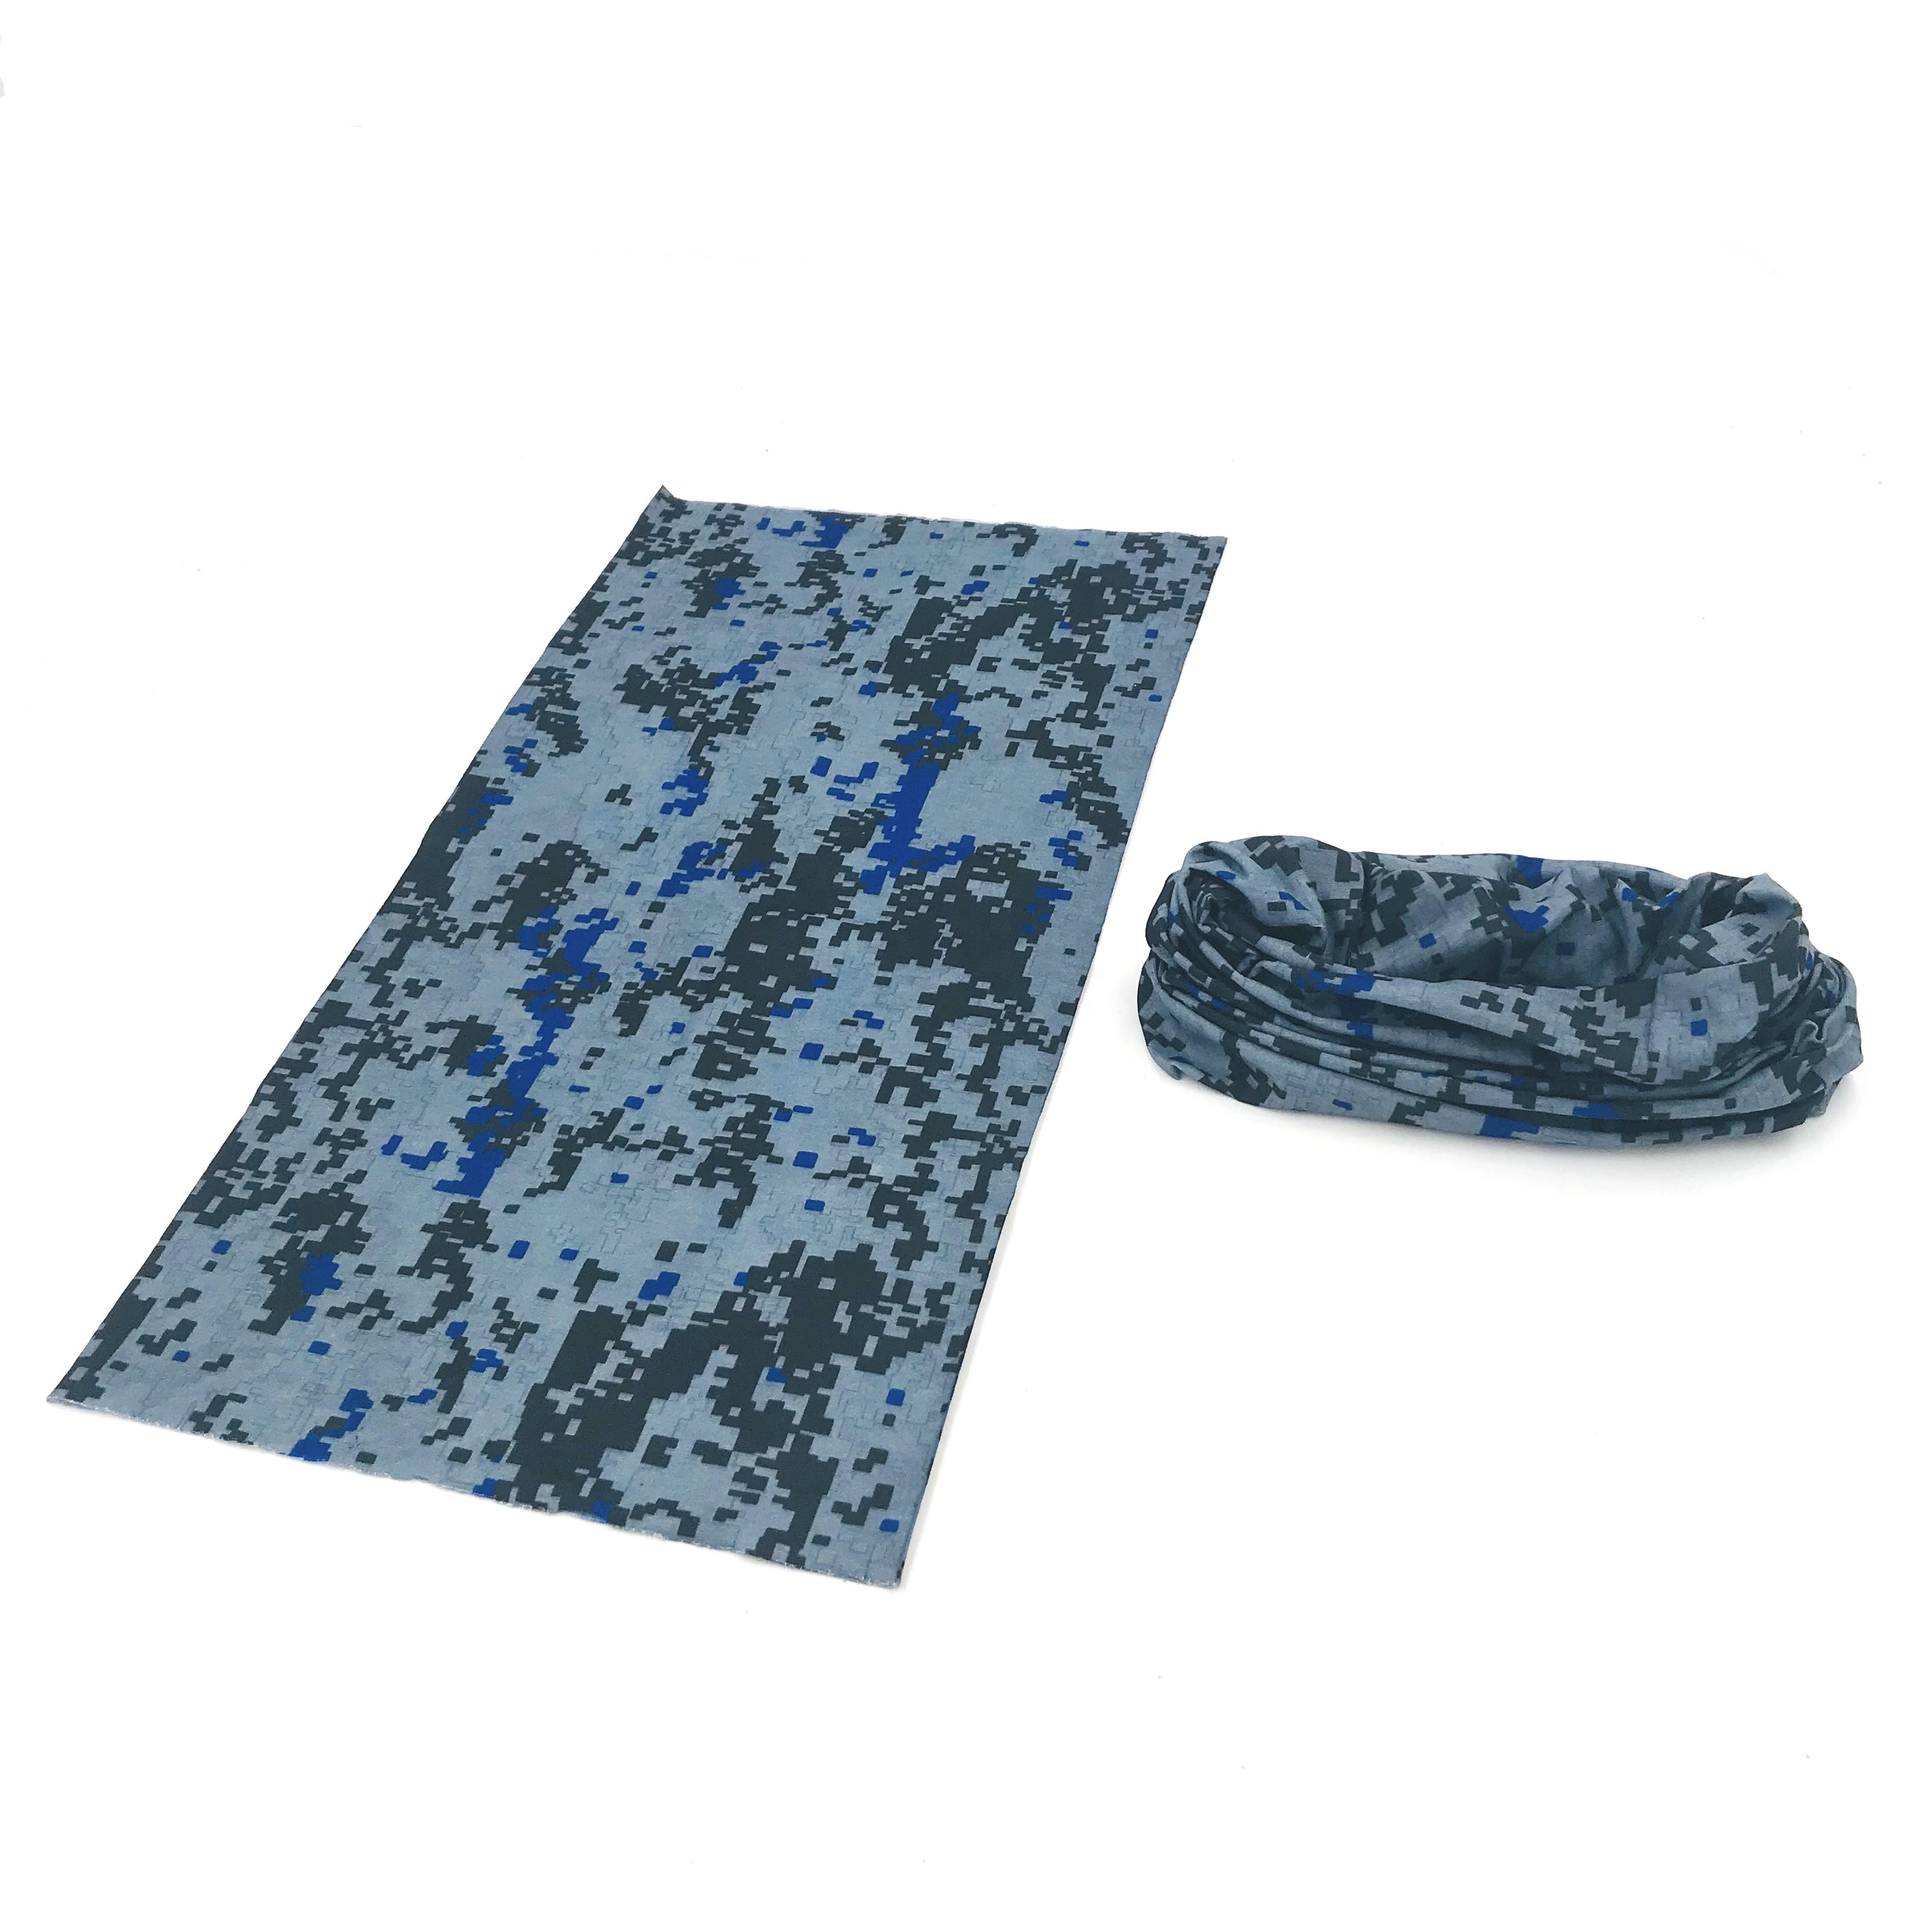 Seamless Camouflage Face Cover Mouth-muffle Bandana Neck Gaiter Cool Lightweight